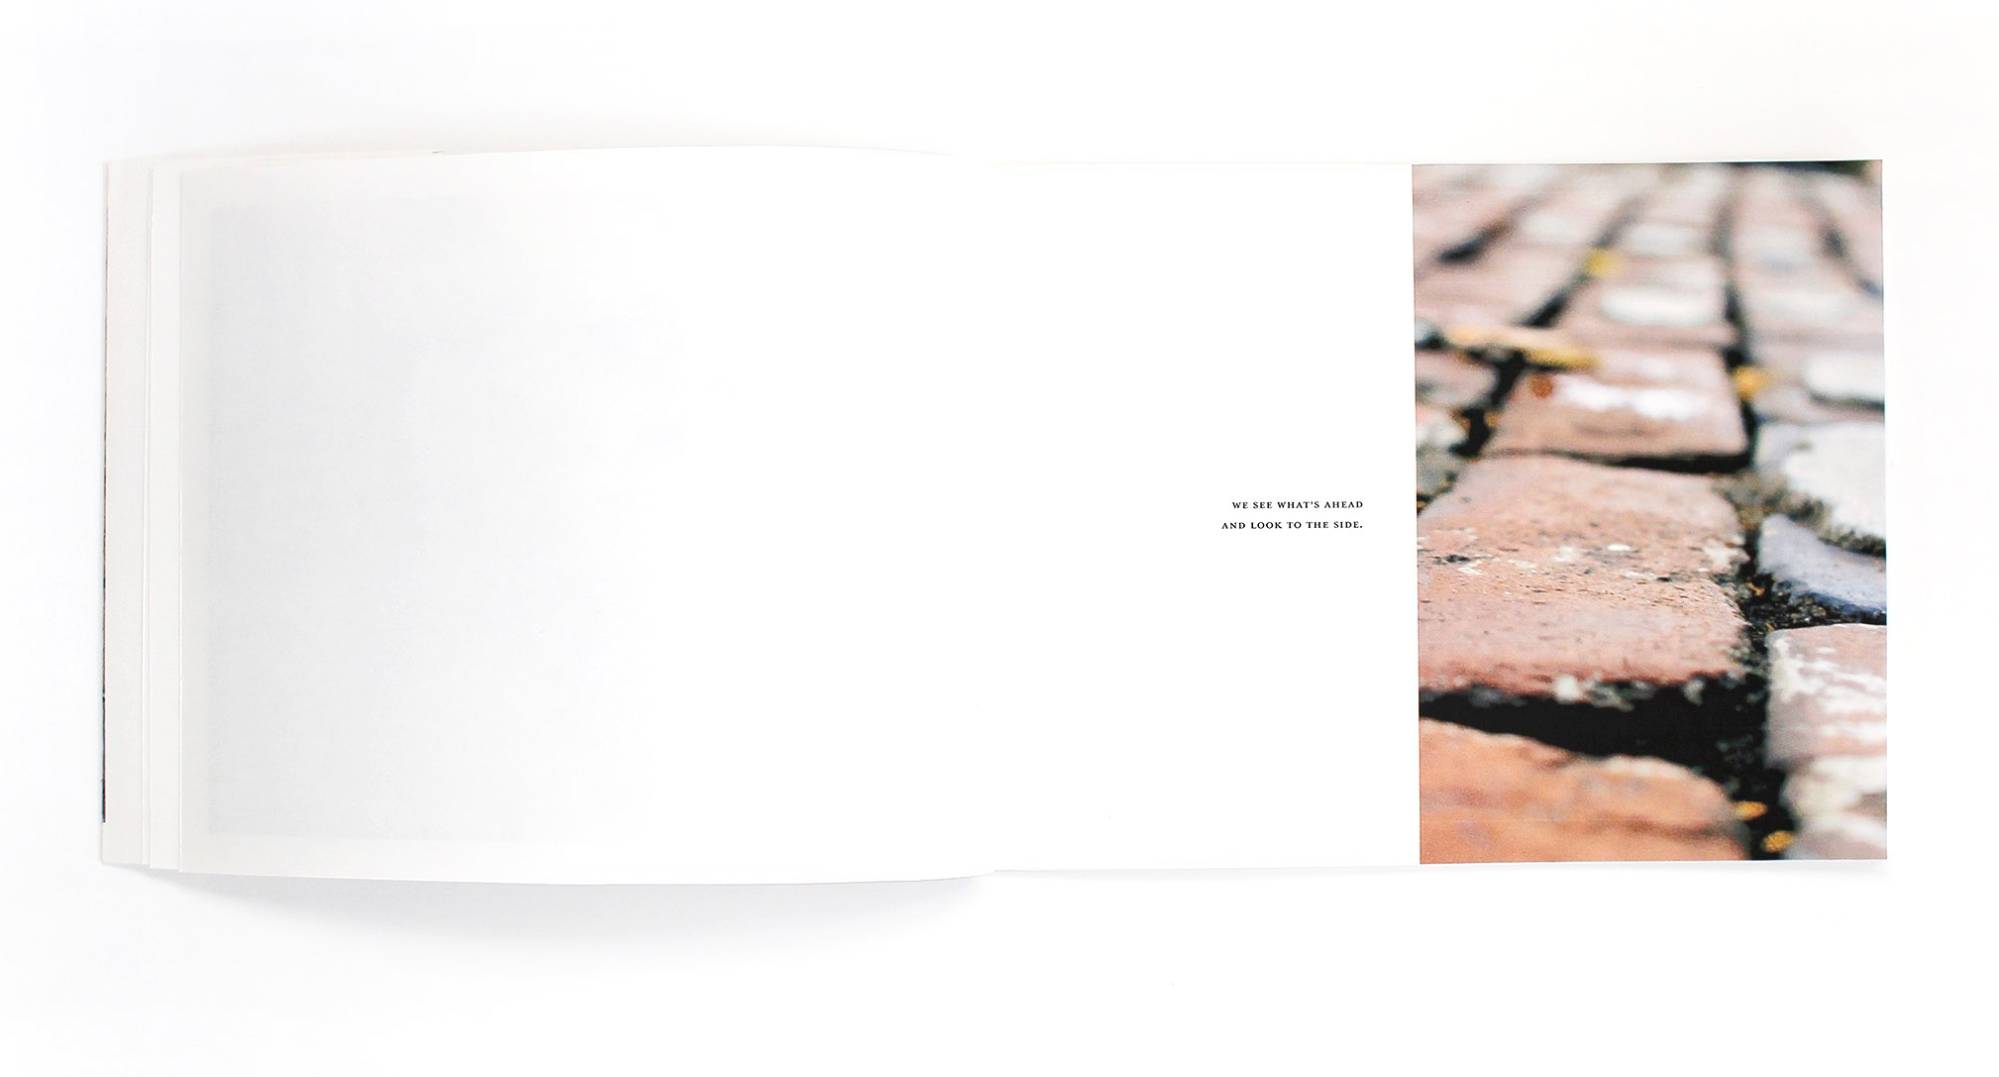 Book Spread with image of brick road on the right side